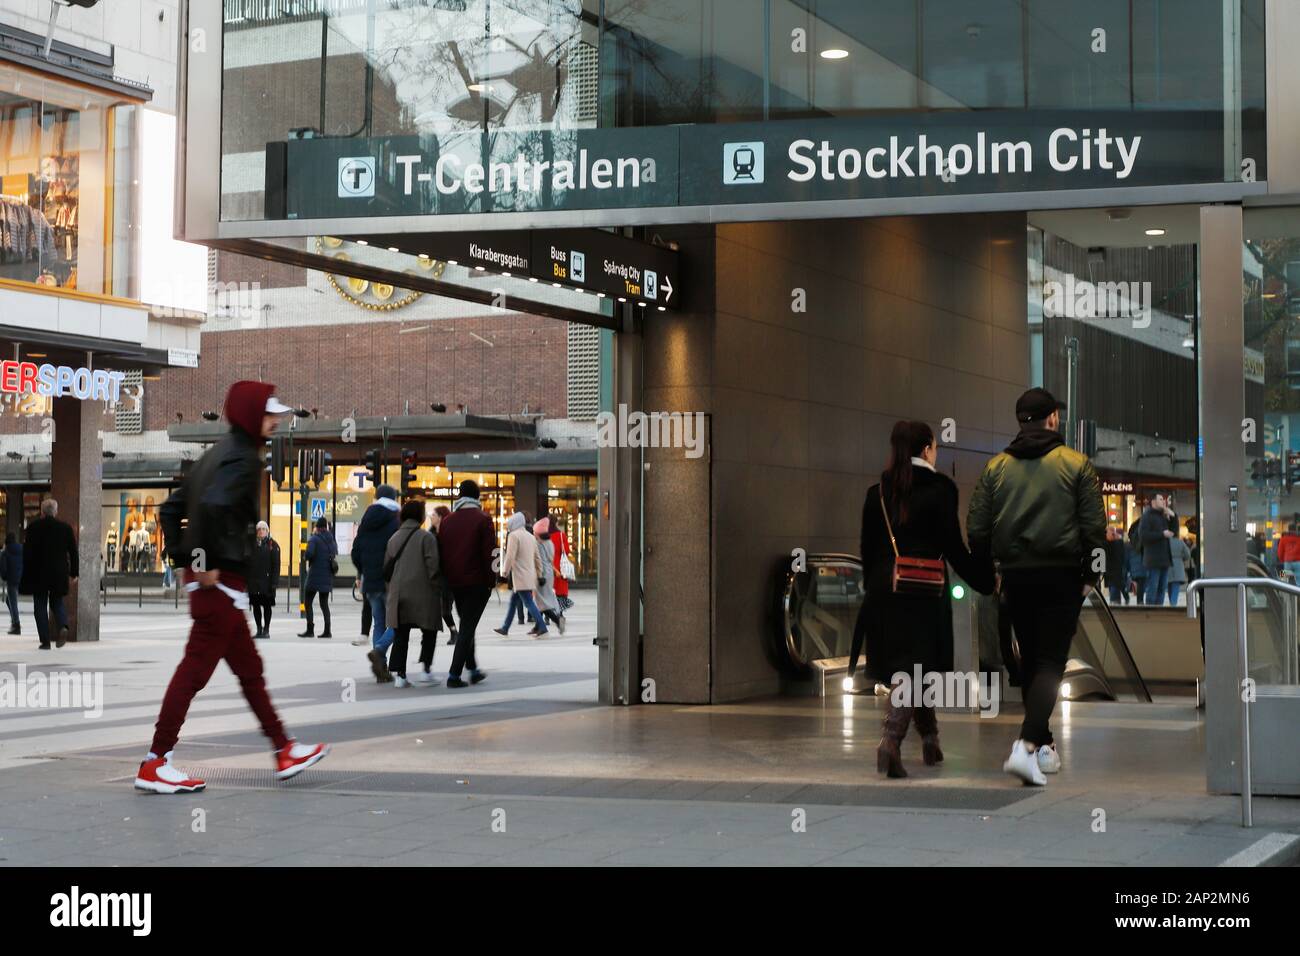 Stockholm, Sweden - January 19, 2020: The entrance at the Sergelstorg square to the Stockholm City railroad station and the T-Centralen metro station. Stock Photo